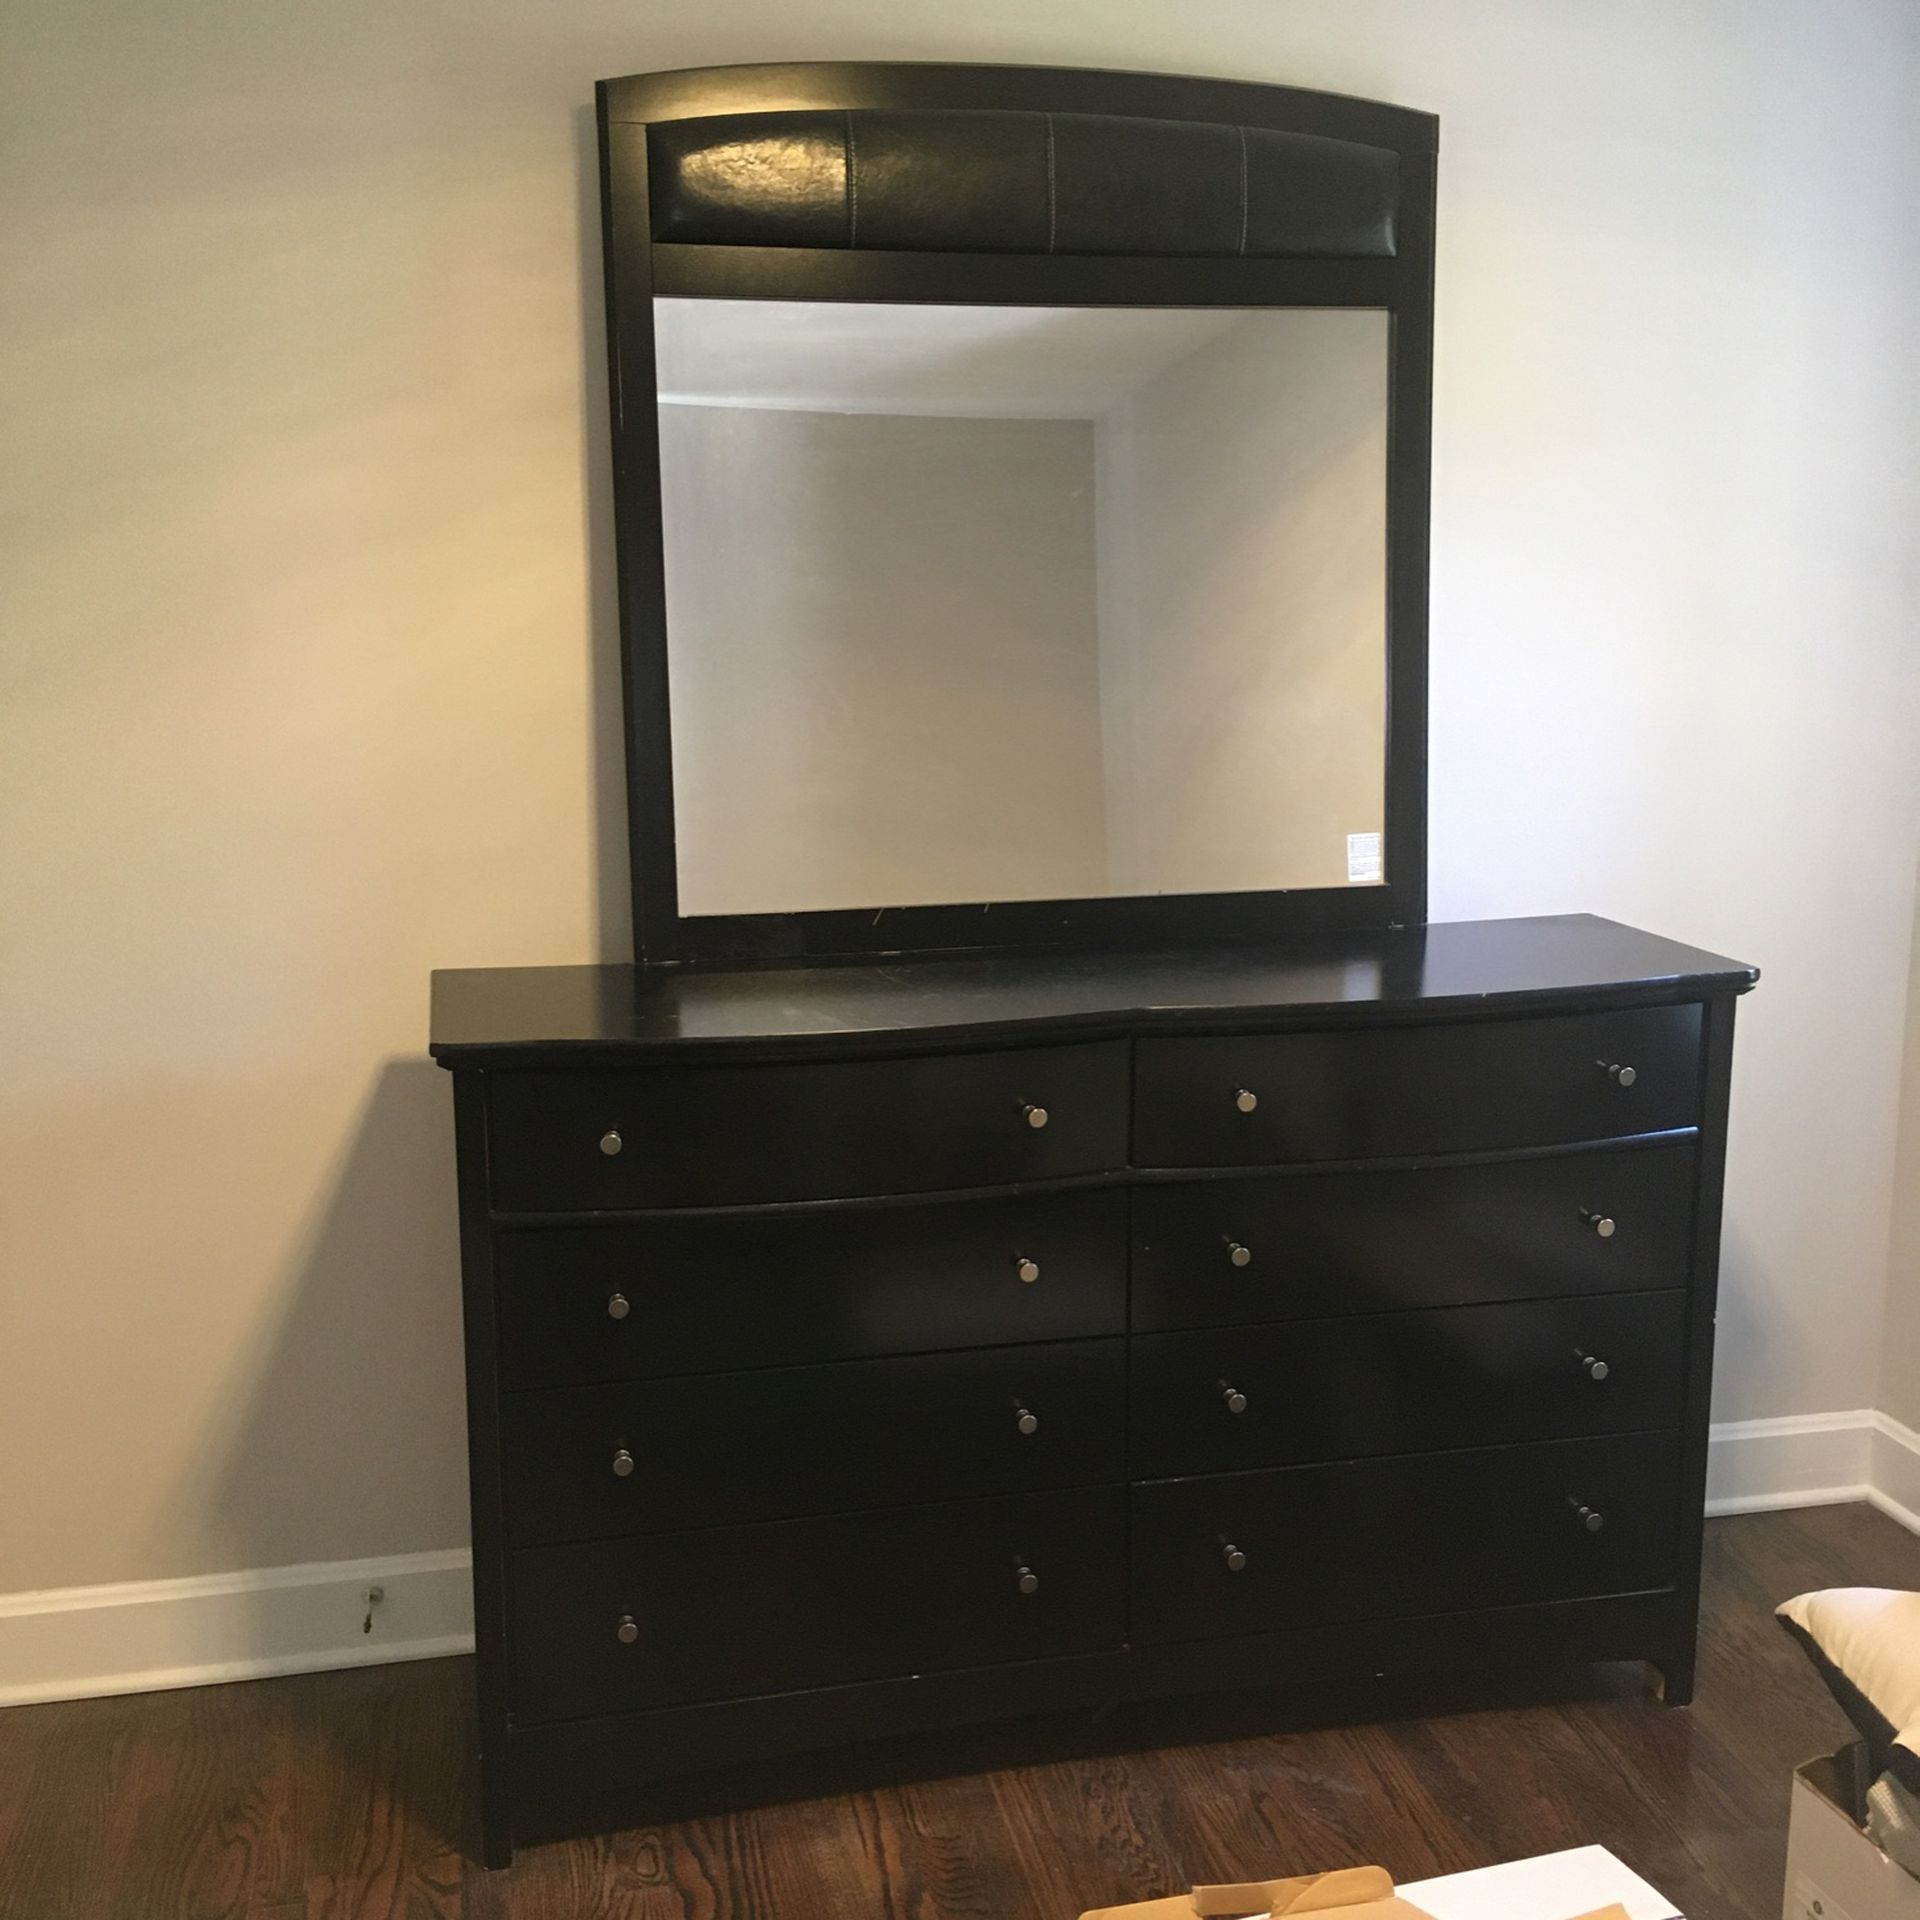 Dresser with mirror and eight drawers - MUST GO! OFFERS!! - $200